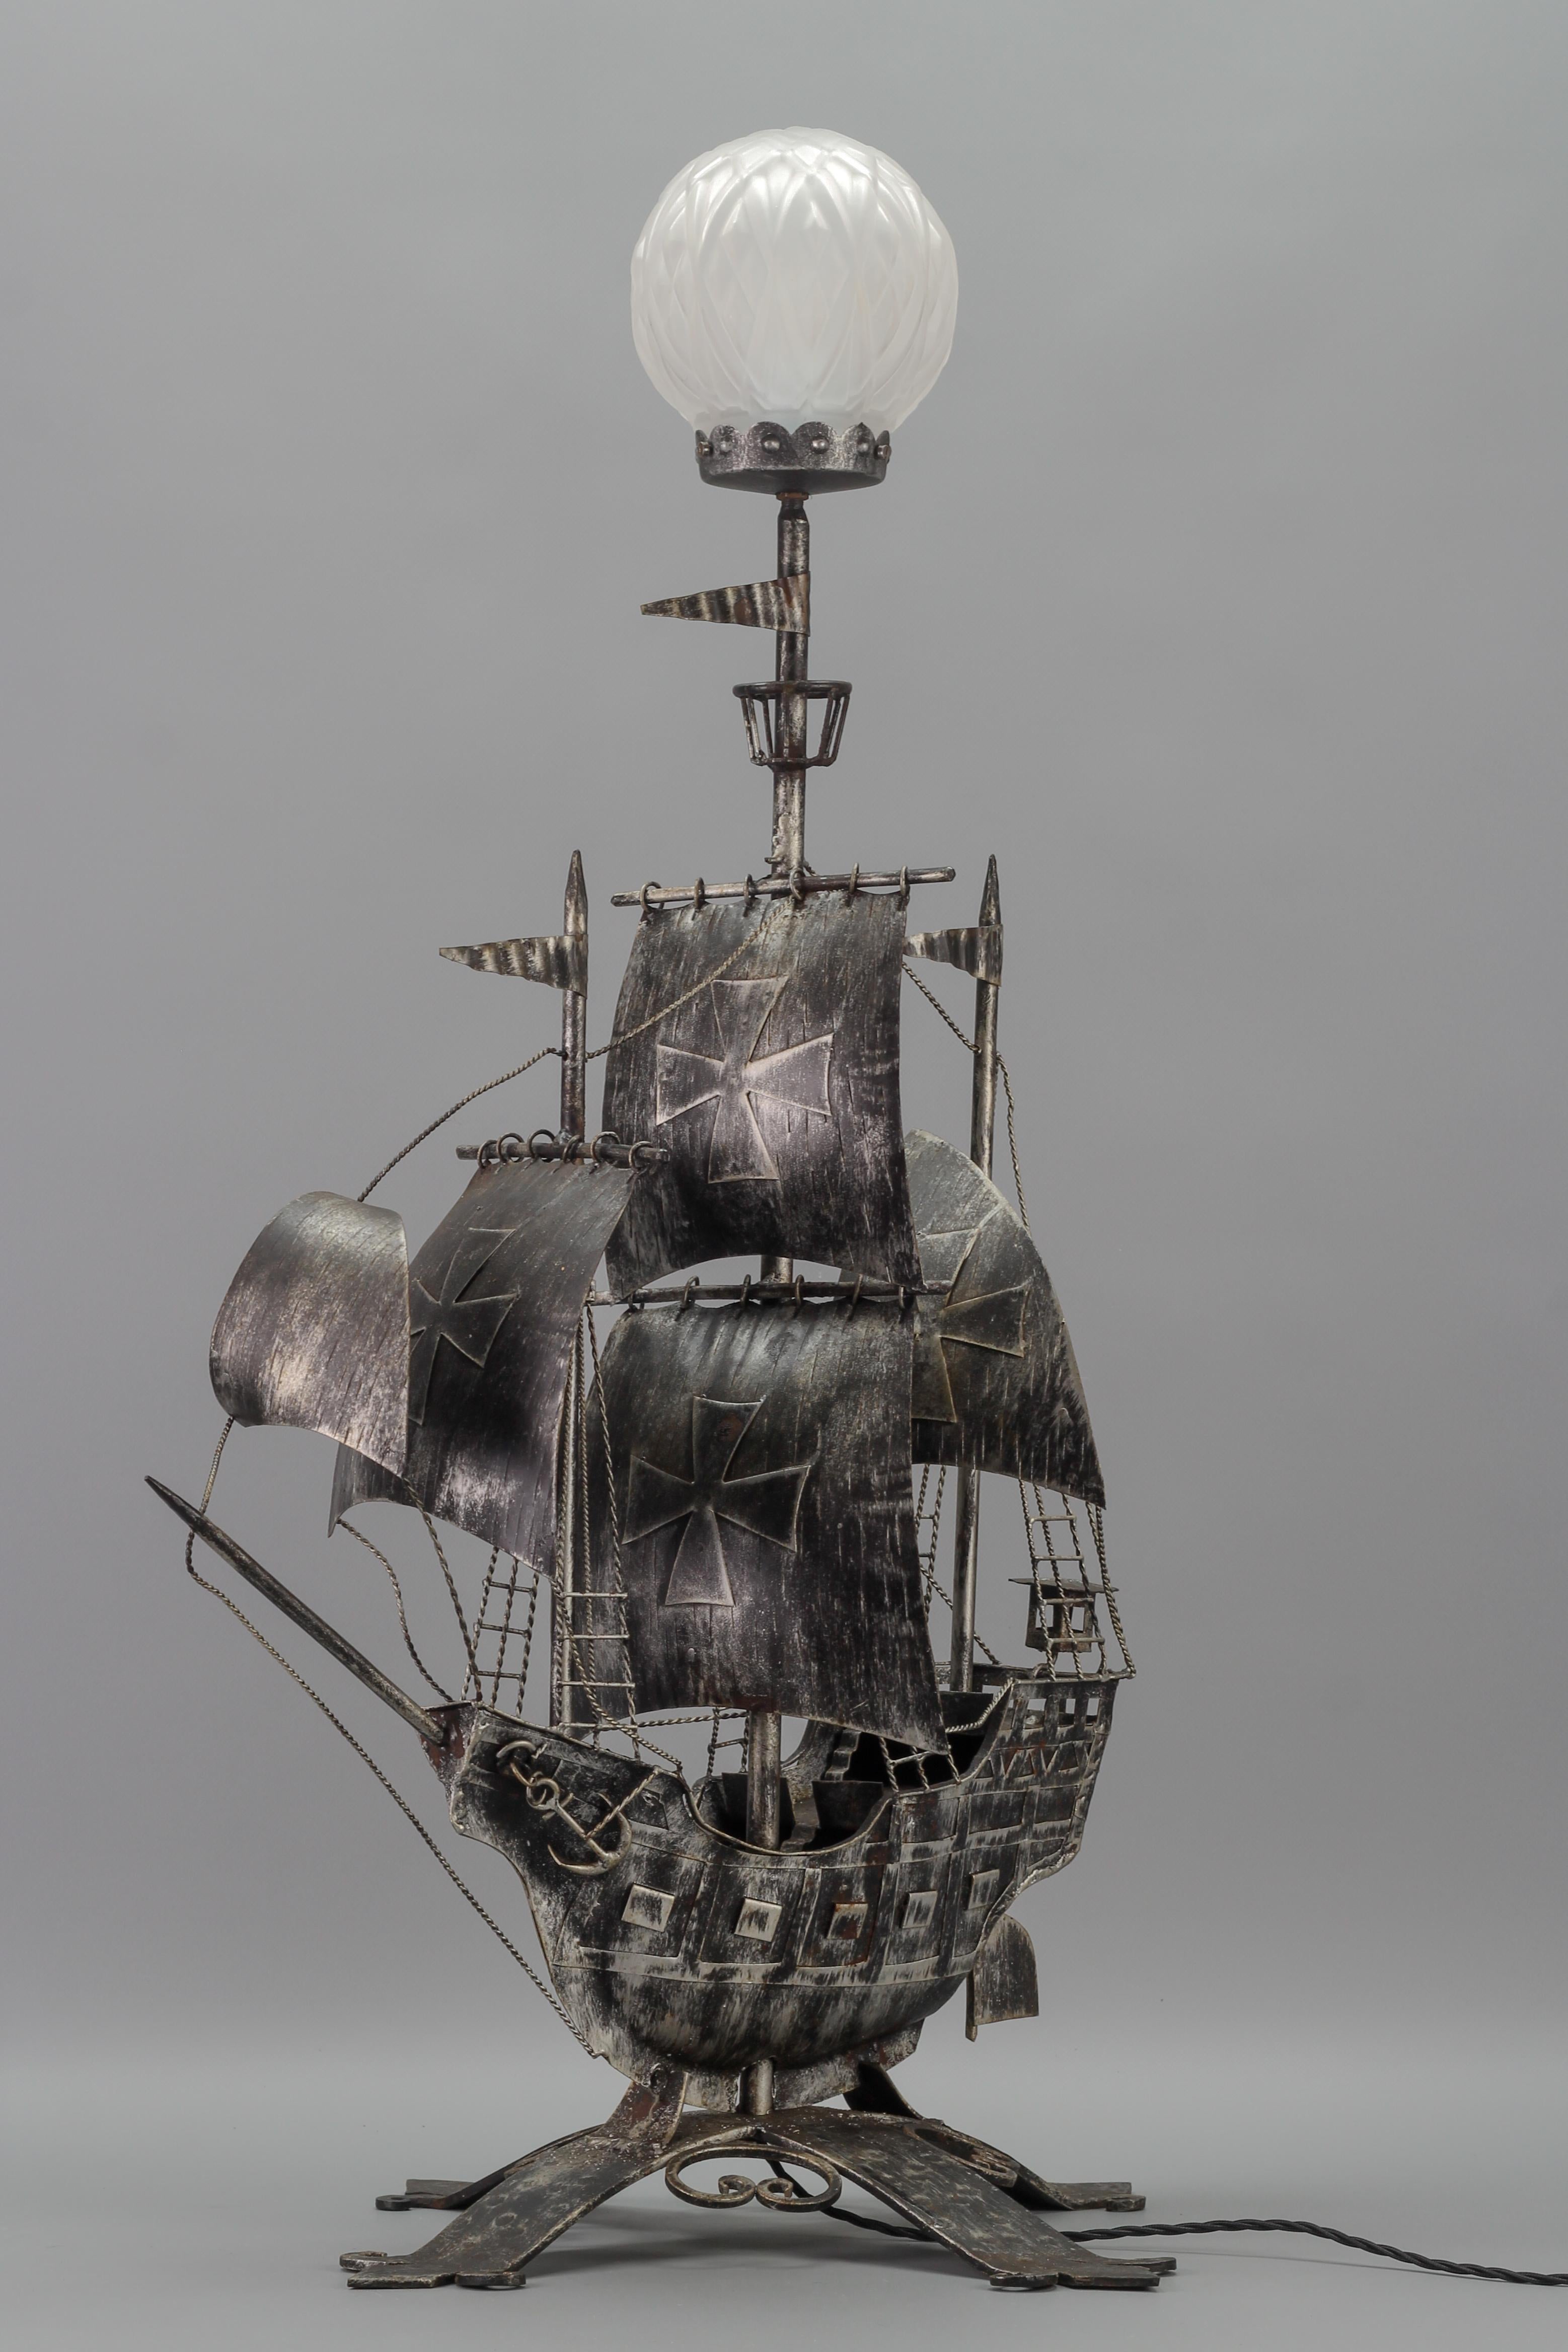 Wrought Iron and Glass Spanish Galleon Sailing Ship Shaped Floor Lamp, 1950s For Sale 10